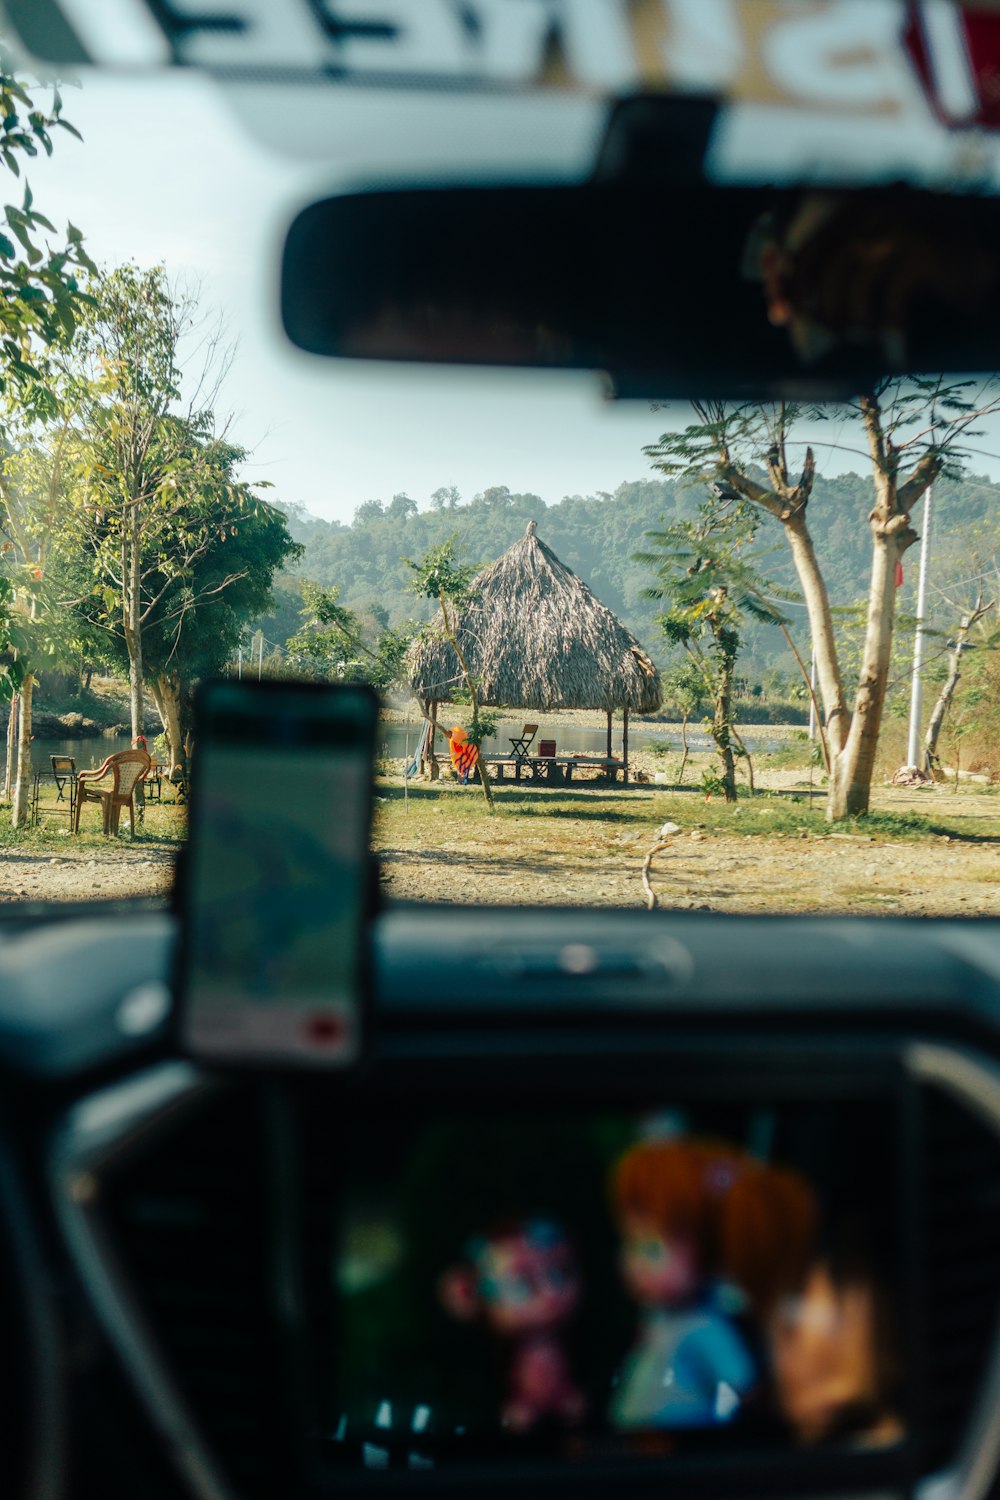 a view from inside a vehicle of a hut